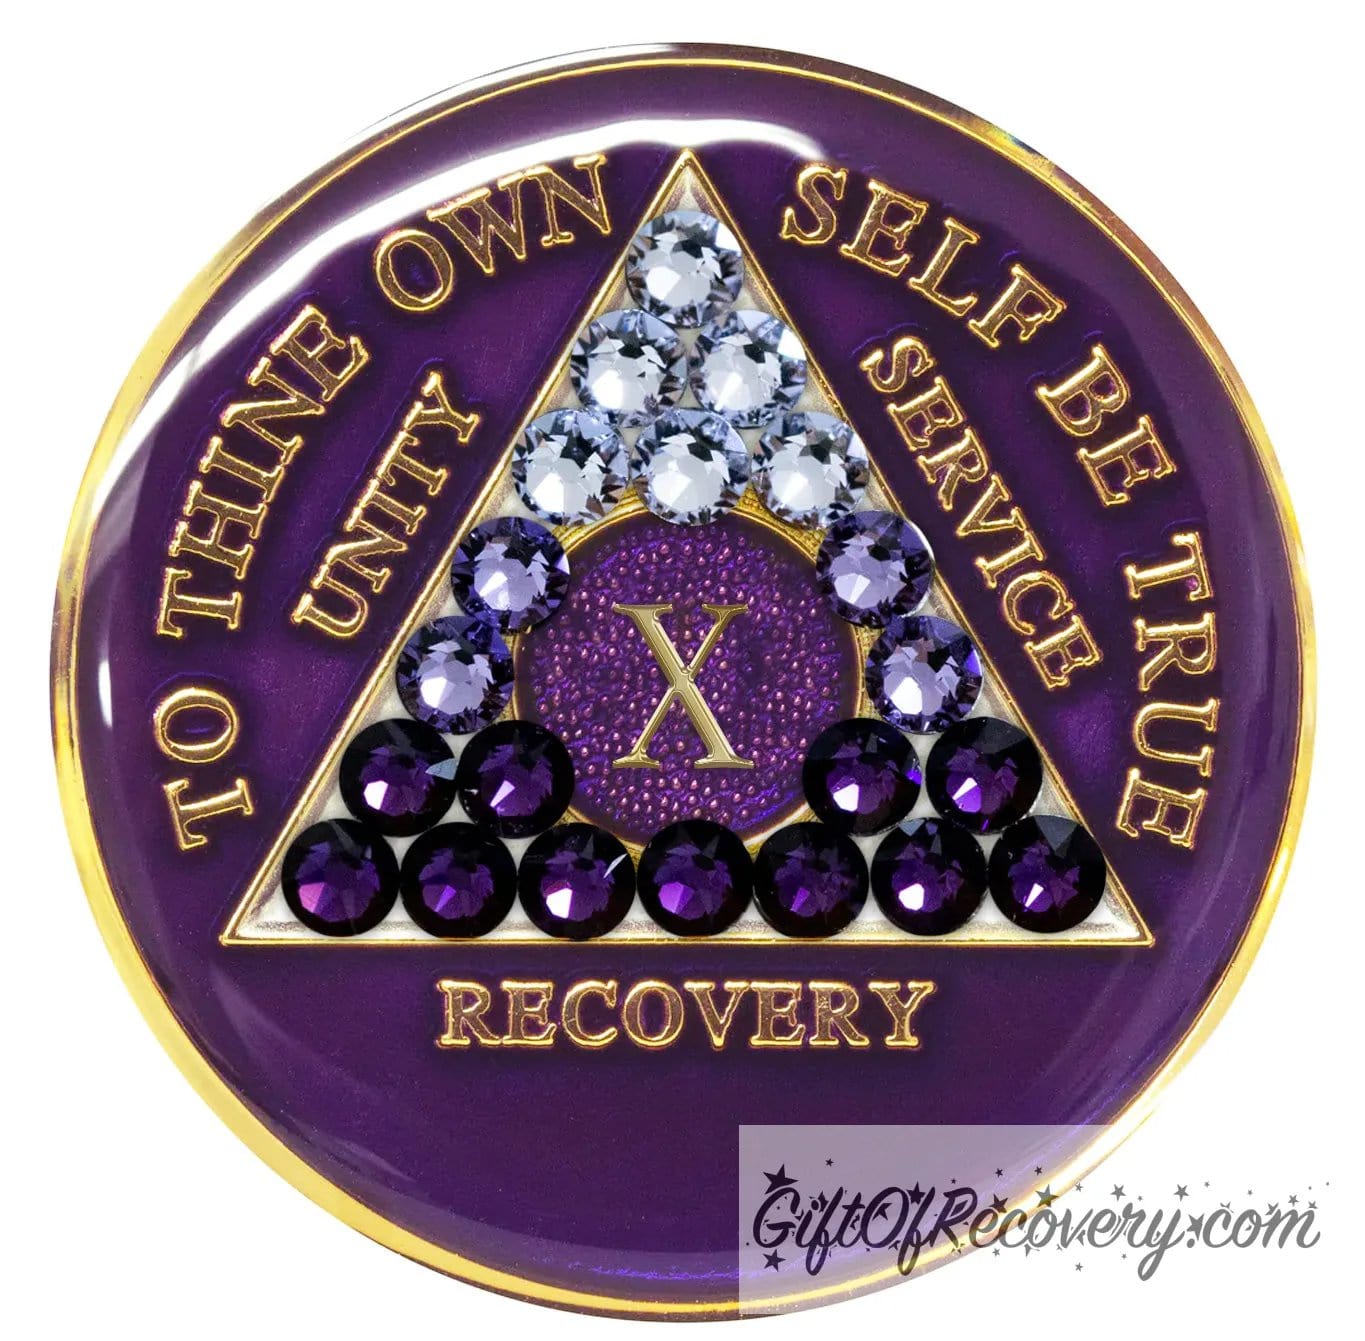 10 year Amethyst purple AA medallion with 21 genuine crystals ranging from light to dark for symbolism of transition, the triangle, circle, roman numeral, unity, recovery, service, and to thine own self be true, are embossed with 14k gold, while the middle of the circle with the roman numeral is purple glitter, the recovery medallion is sealed with resin for a glossy finish. 